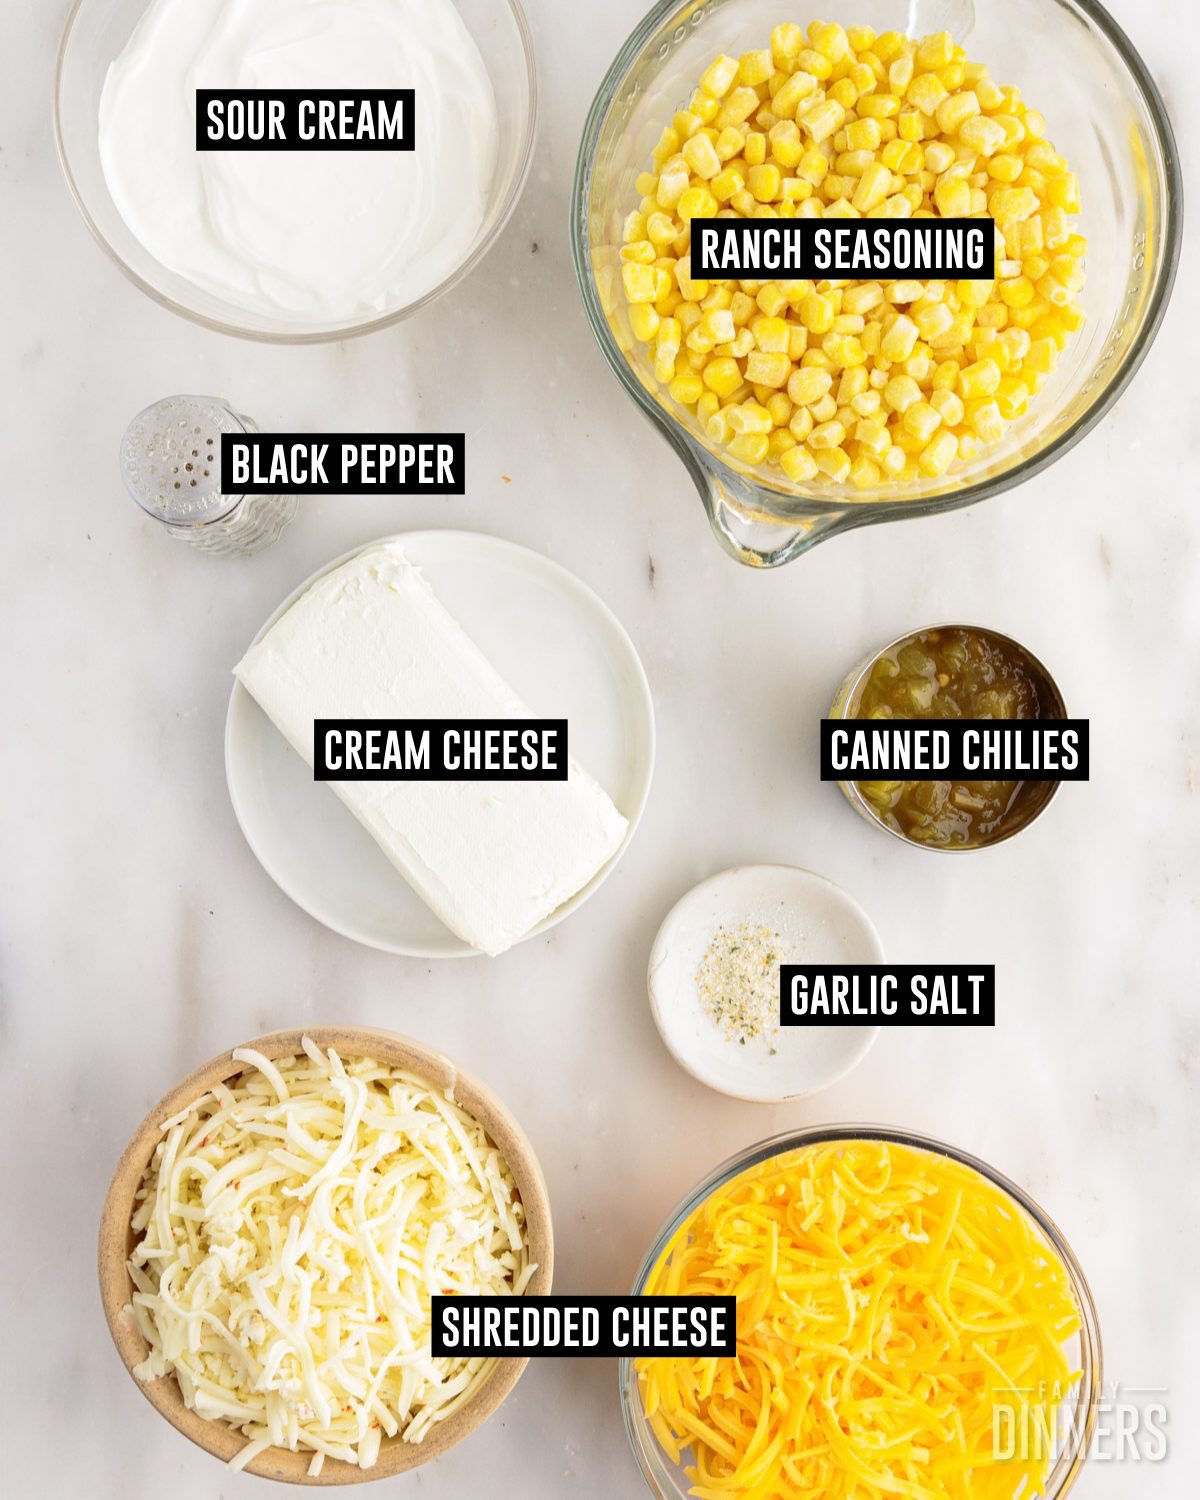 Crack corn dip ingredients in bowls: corn, sour cream, cream cheese, canned green chilies, shredded cheese, garlic salt and black pepper.